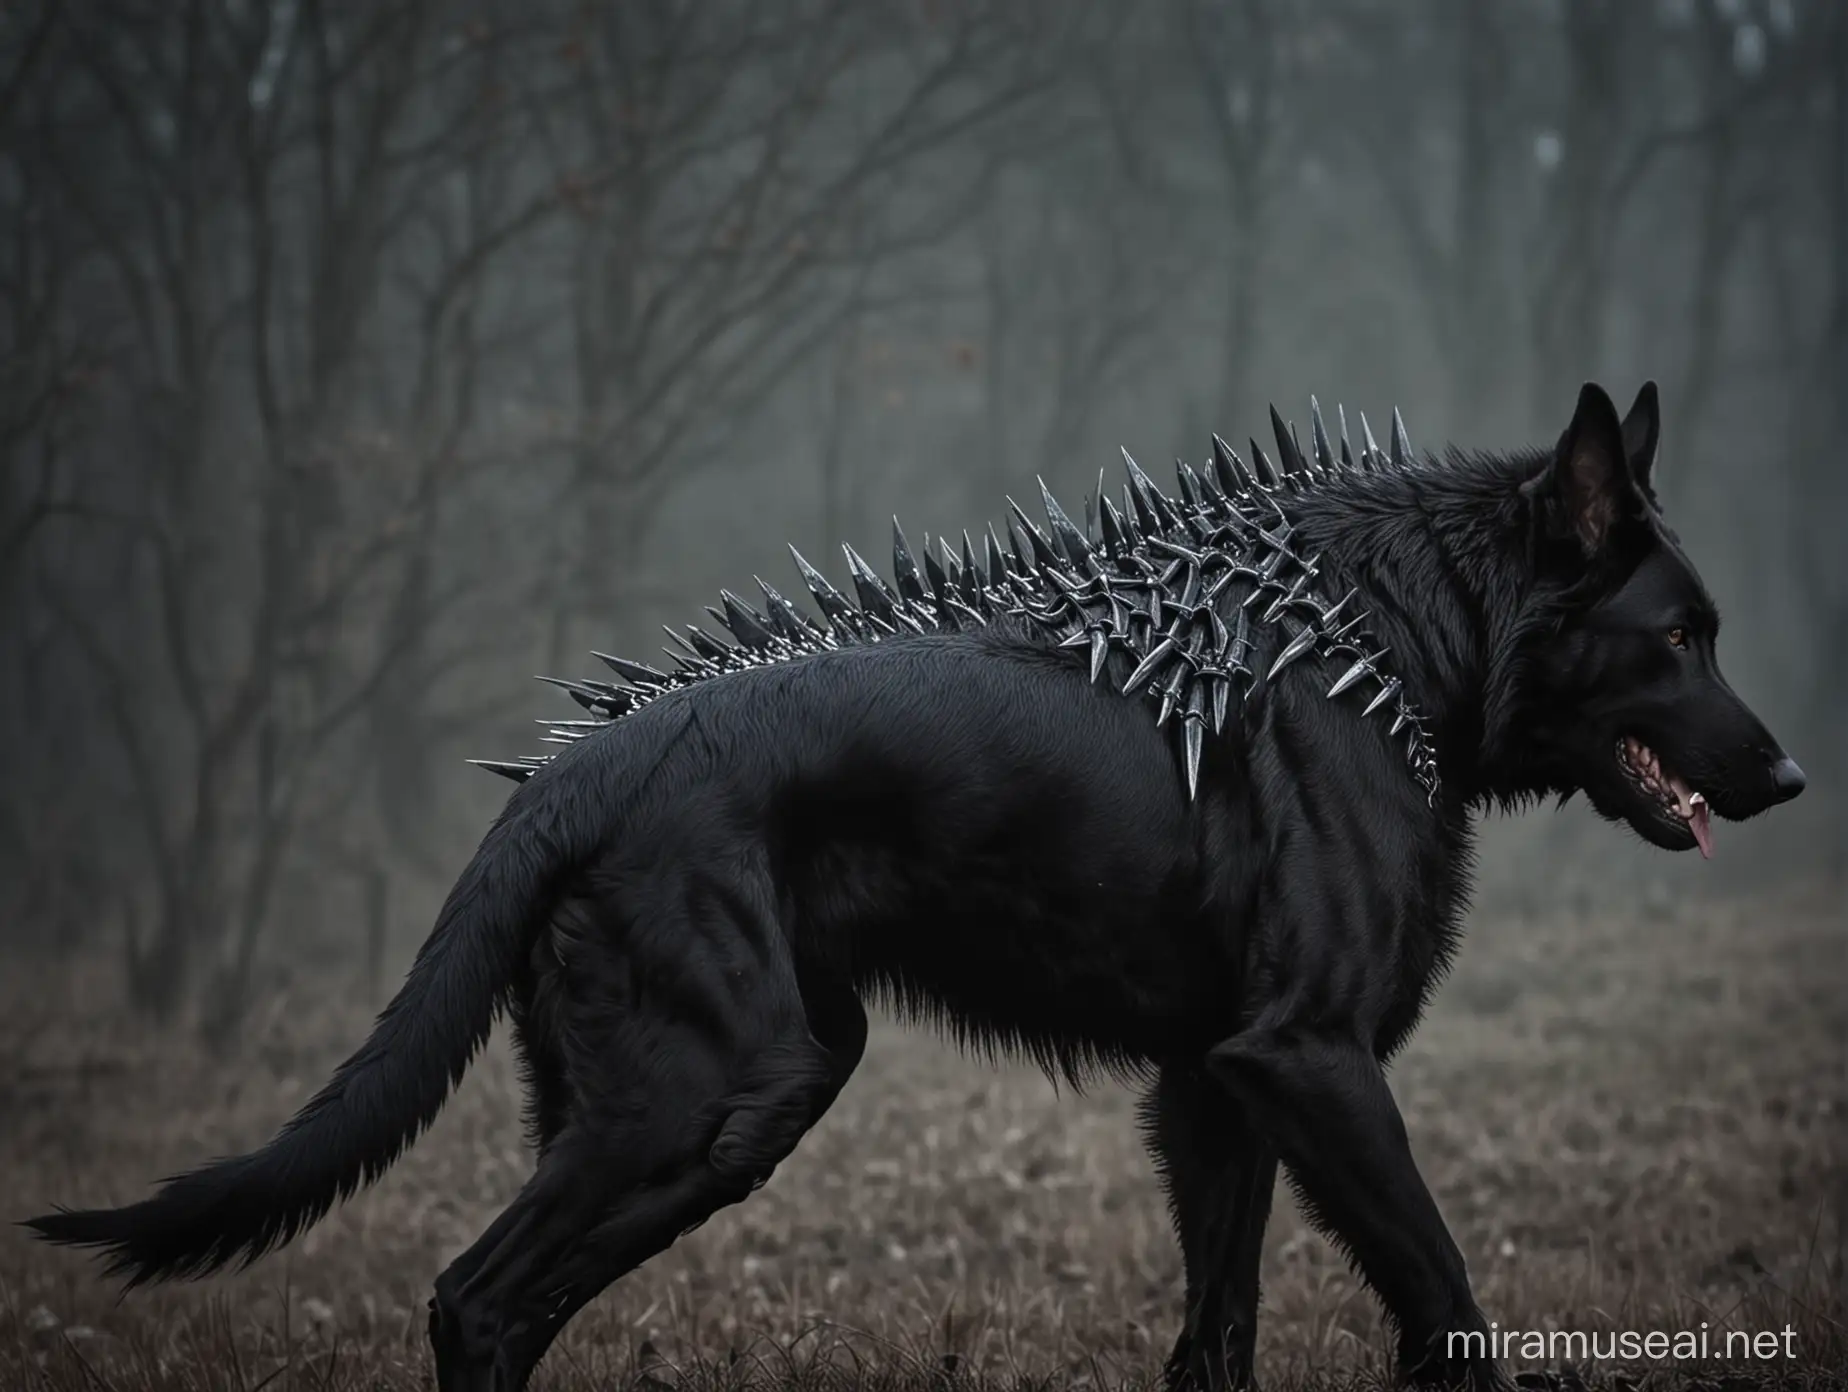 Dark Hound with Spikes on Its Back